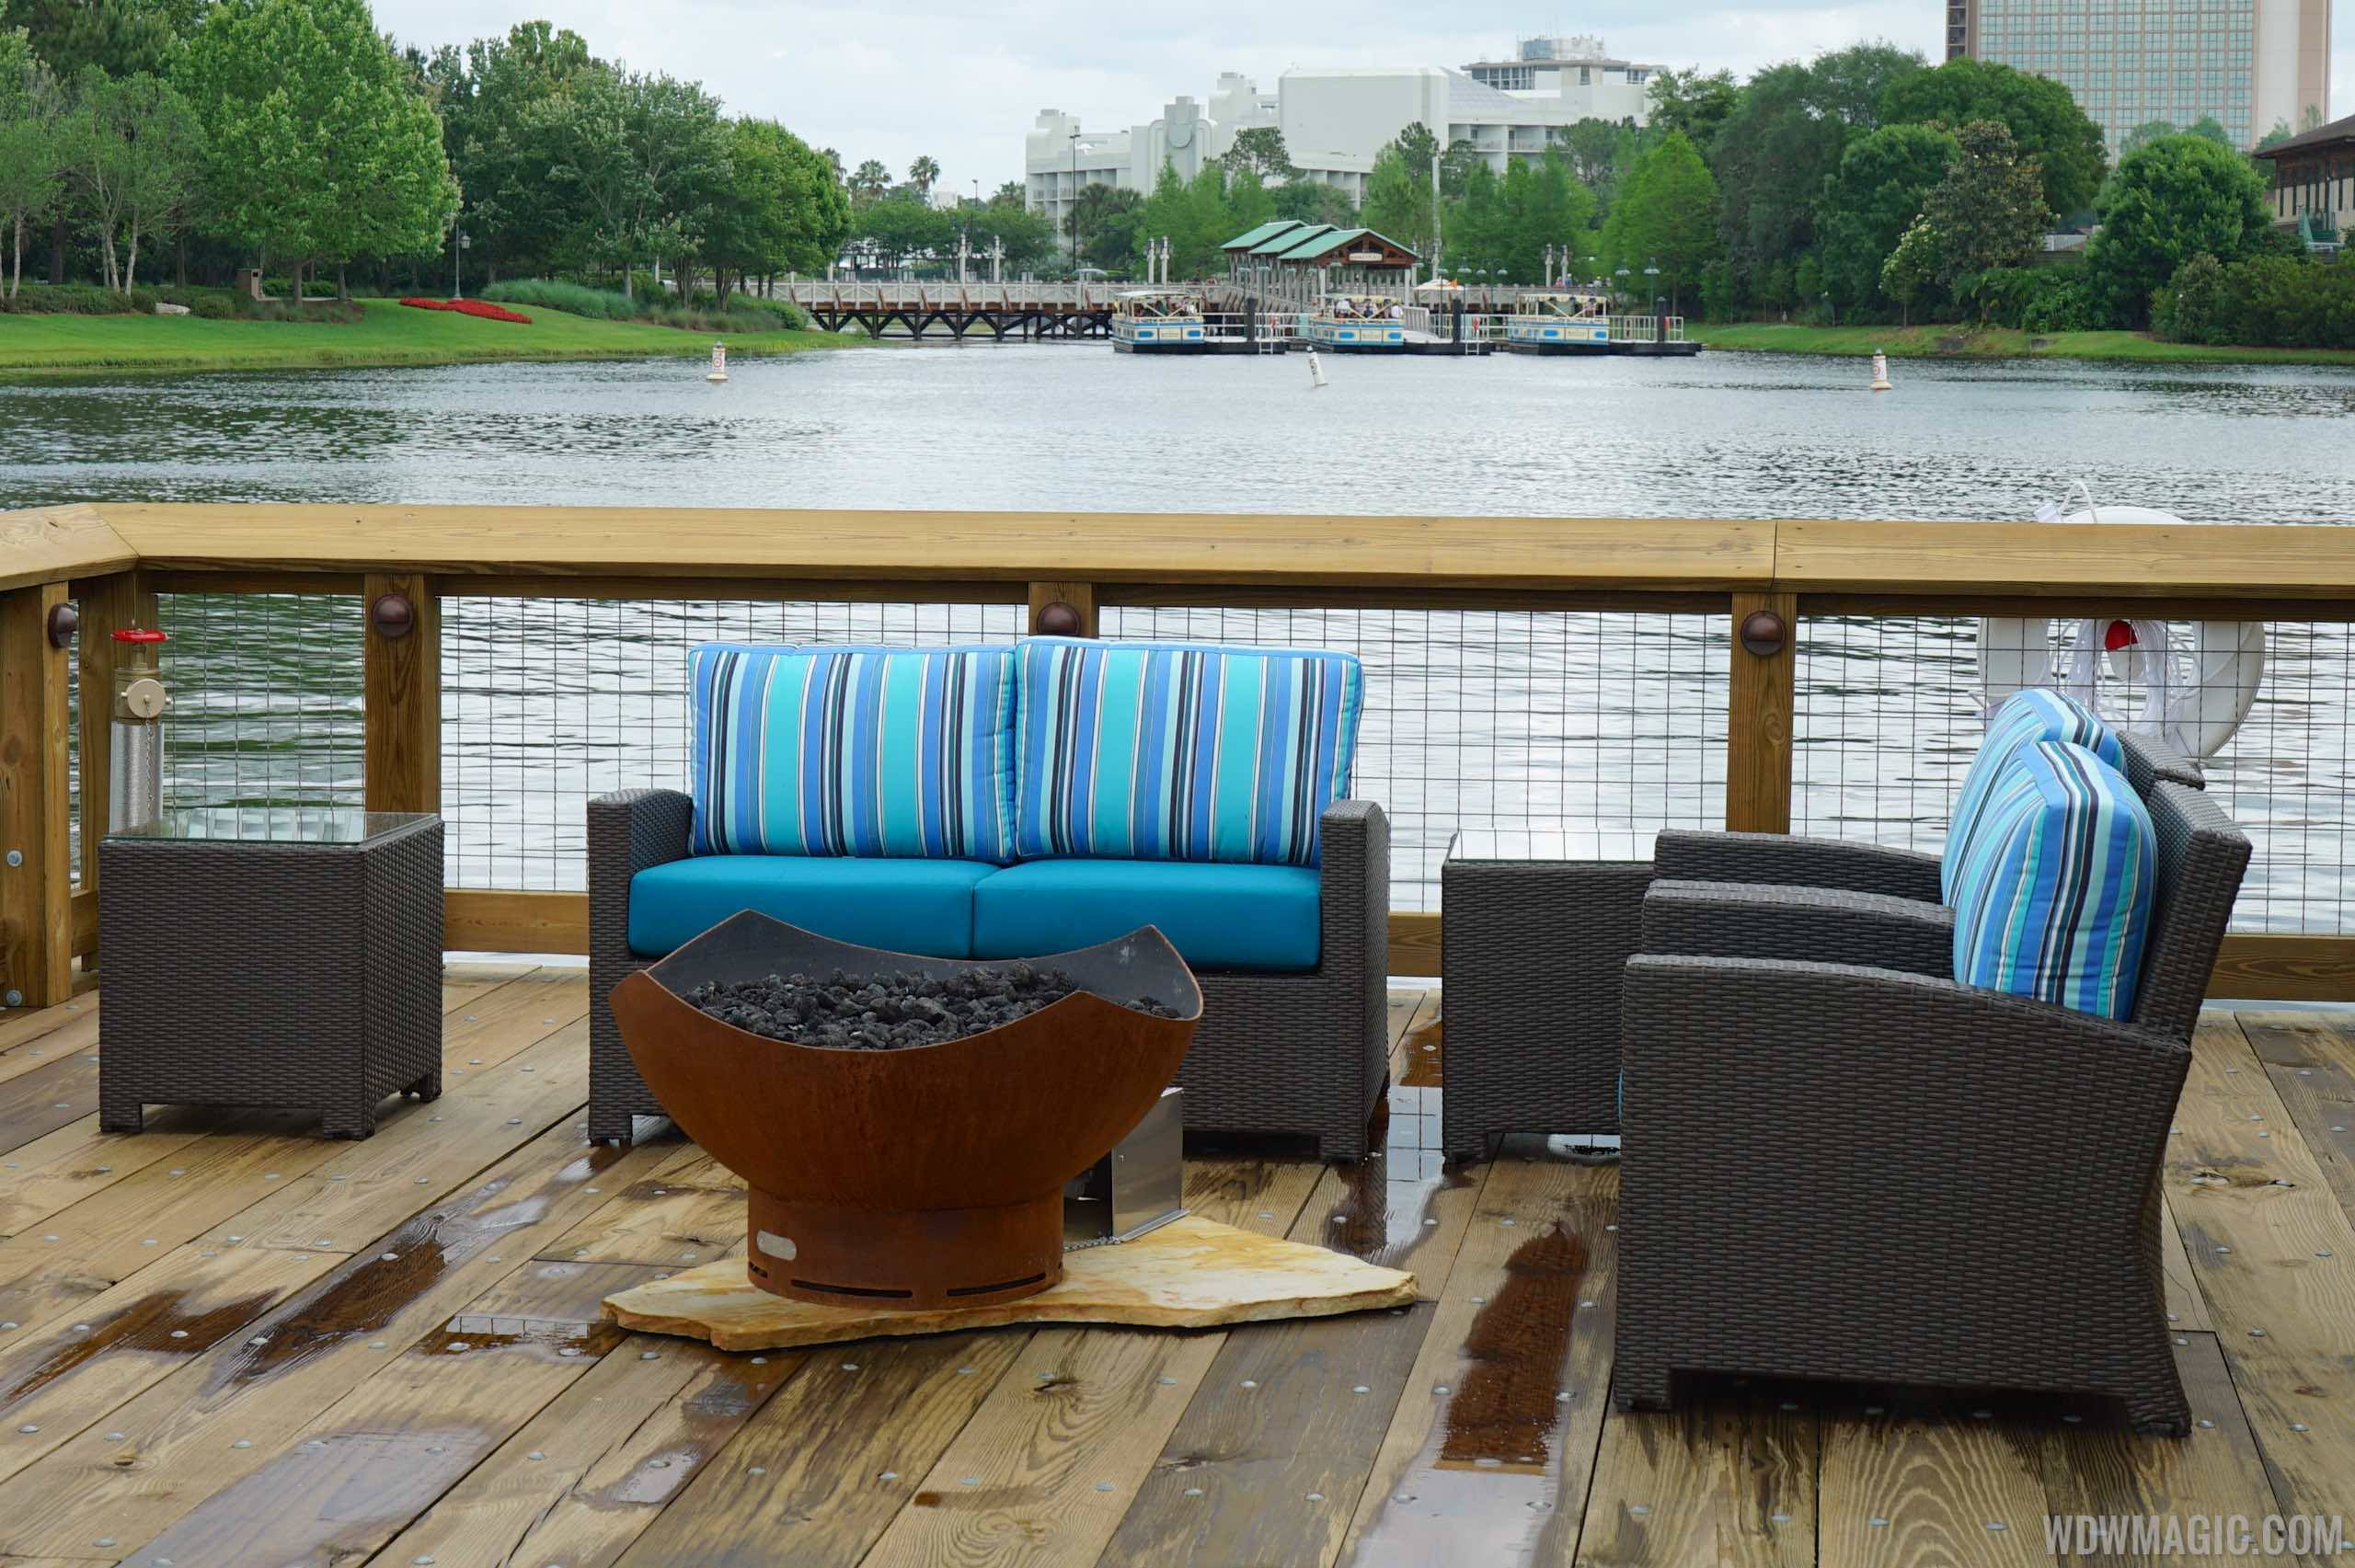 The BOATHOUSE - Outdoor seating